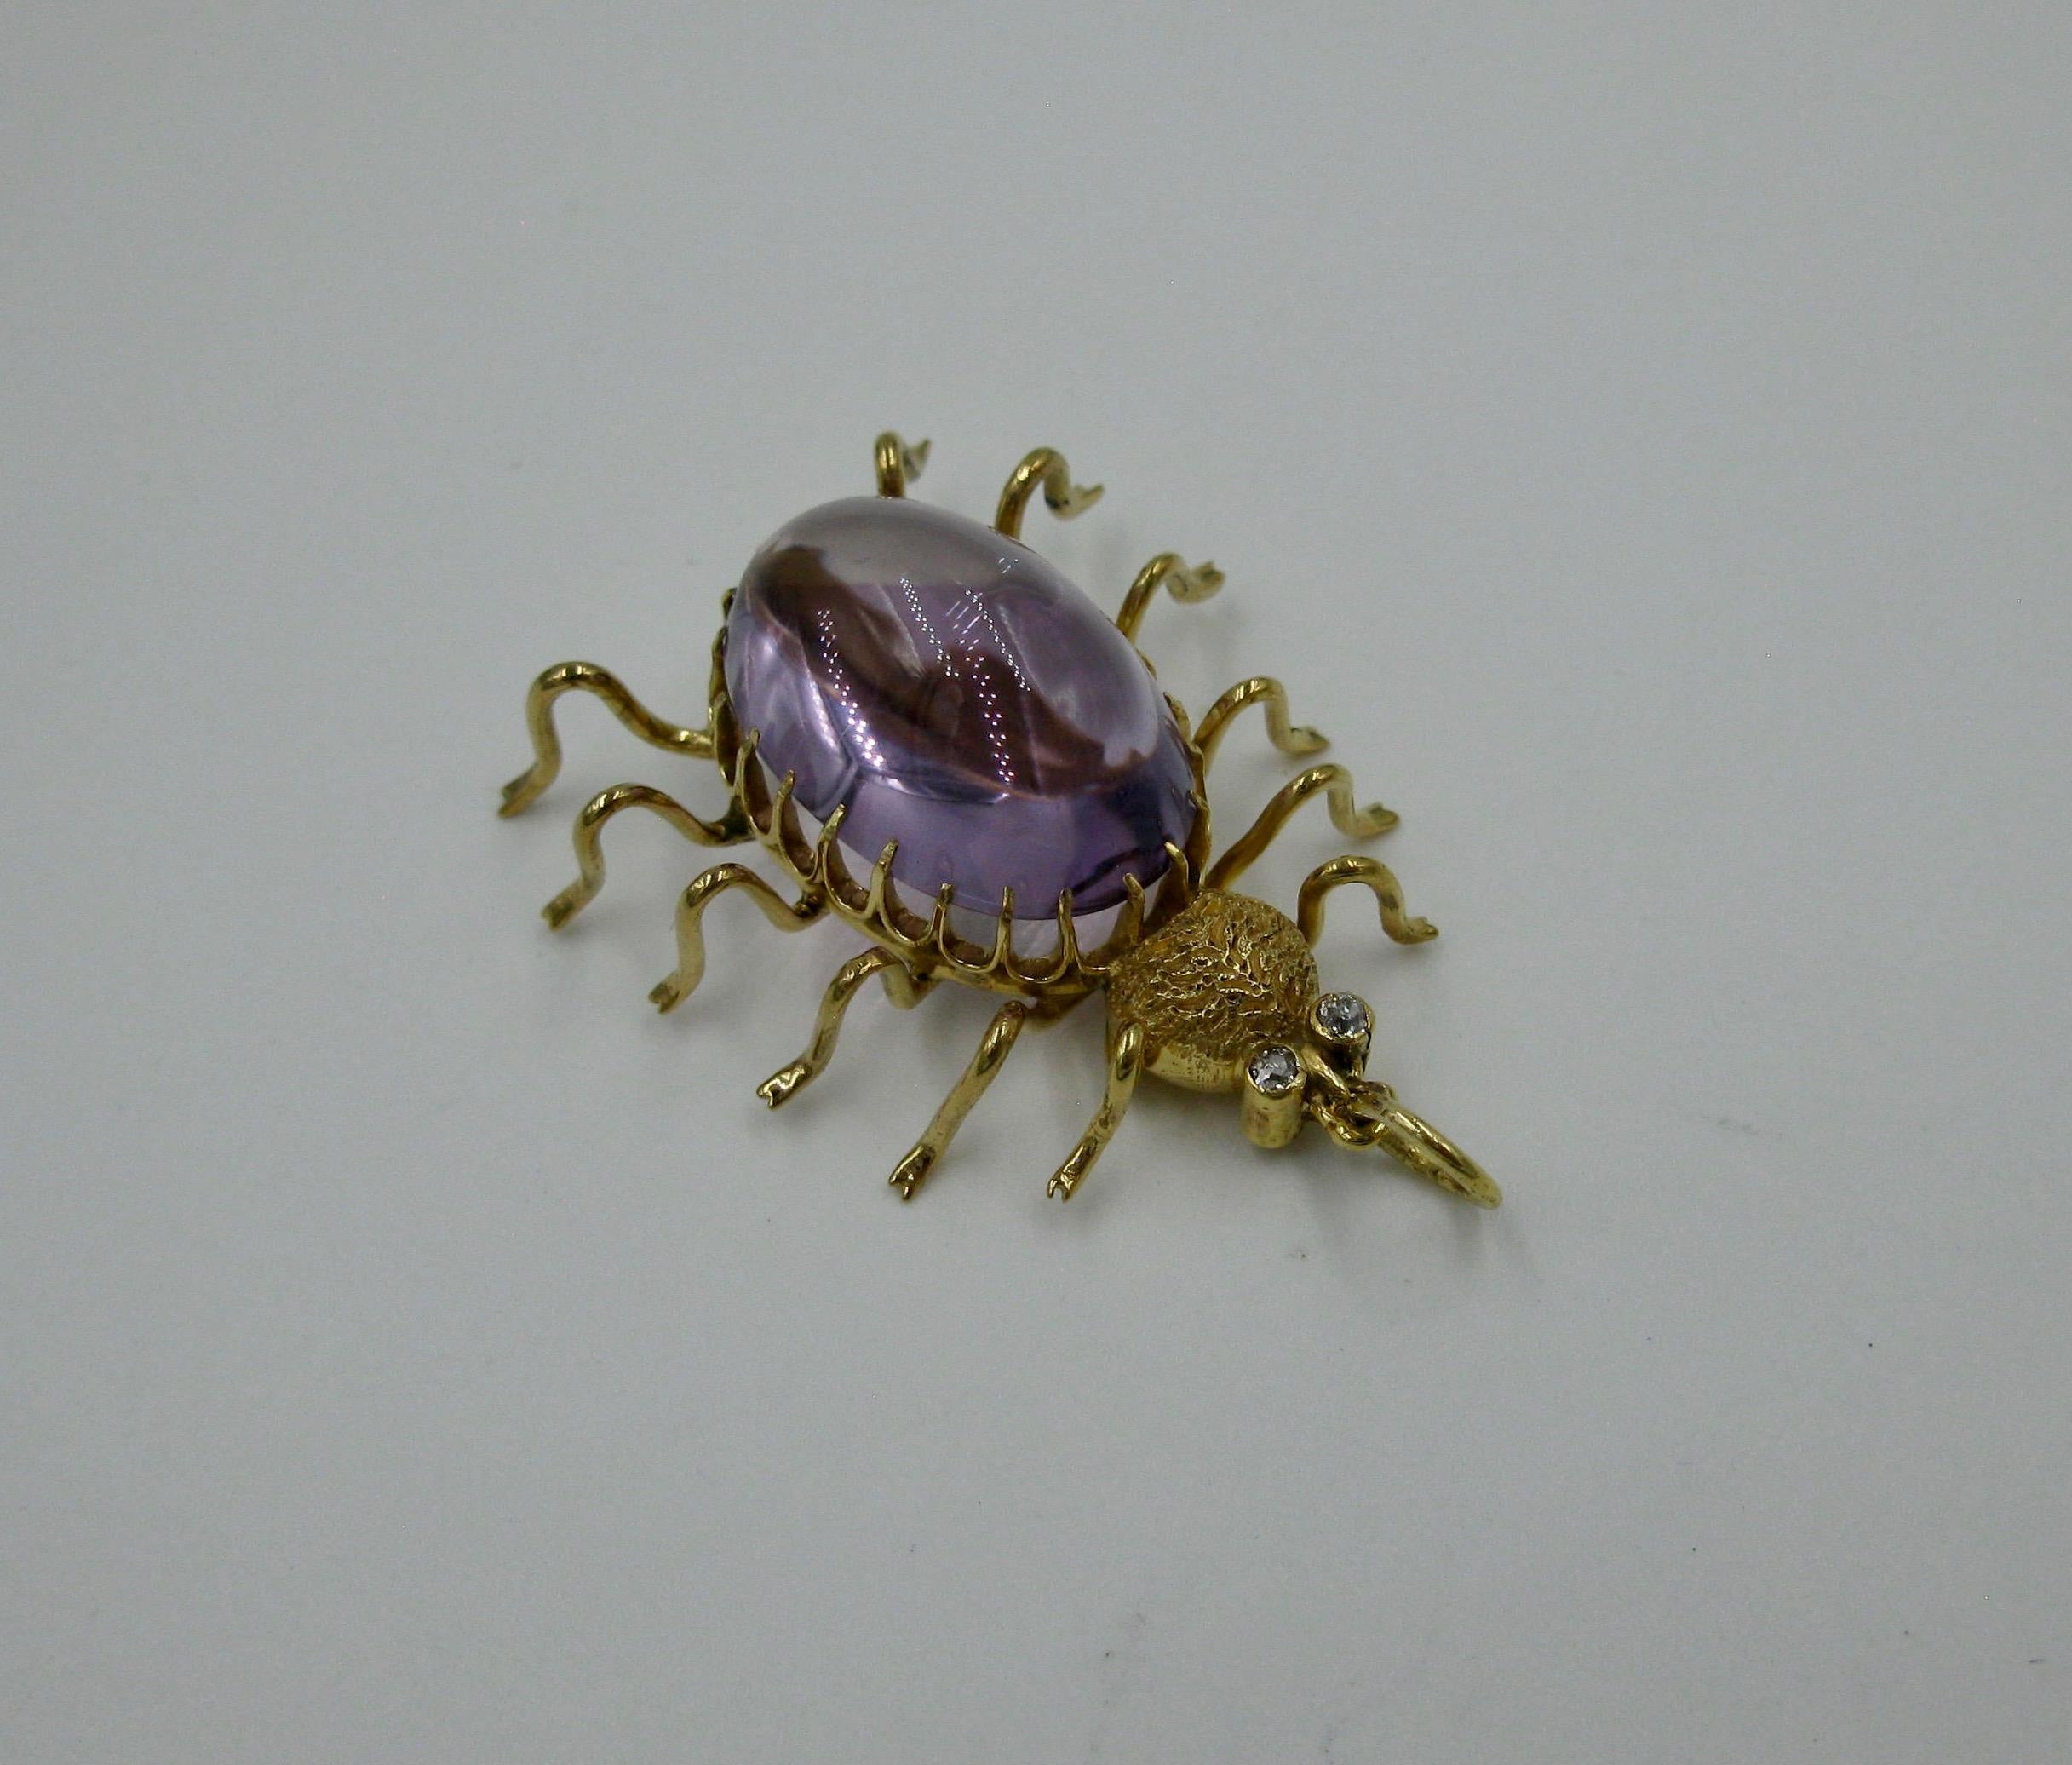 This is a wonderful Amethyst Diamond Spider Pendant!  The vintage modernist spider is set with a 10 Carat oval cabochon Amethyst of great beauty.  The Amethyst is a stunning purple gem.  The spiders eyes are round Diamonds.  The jewels are set in 10